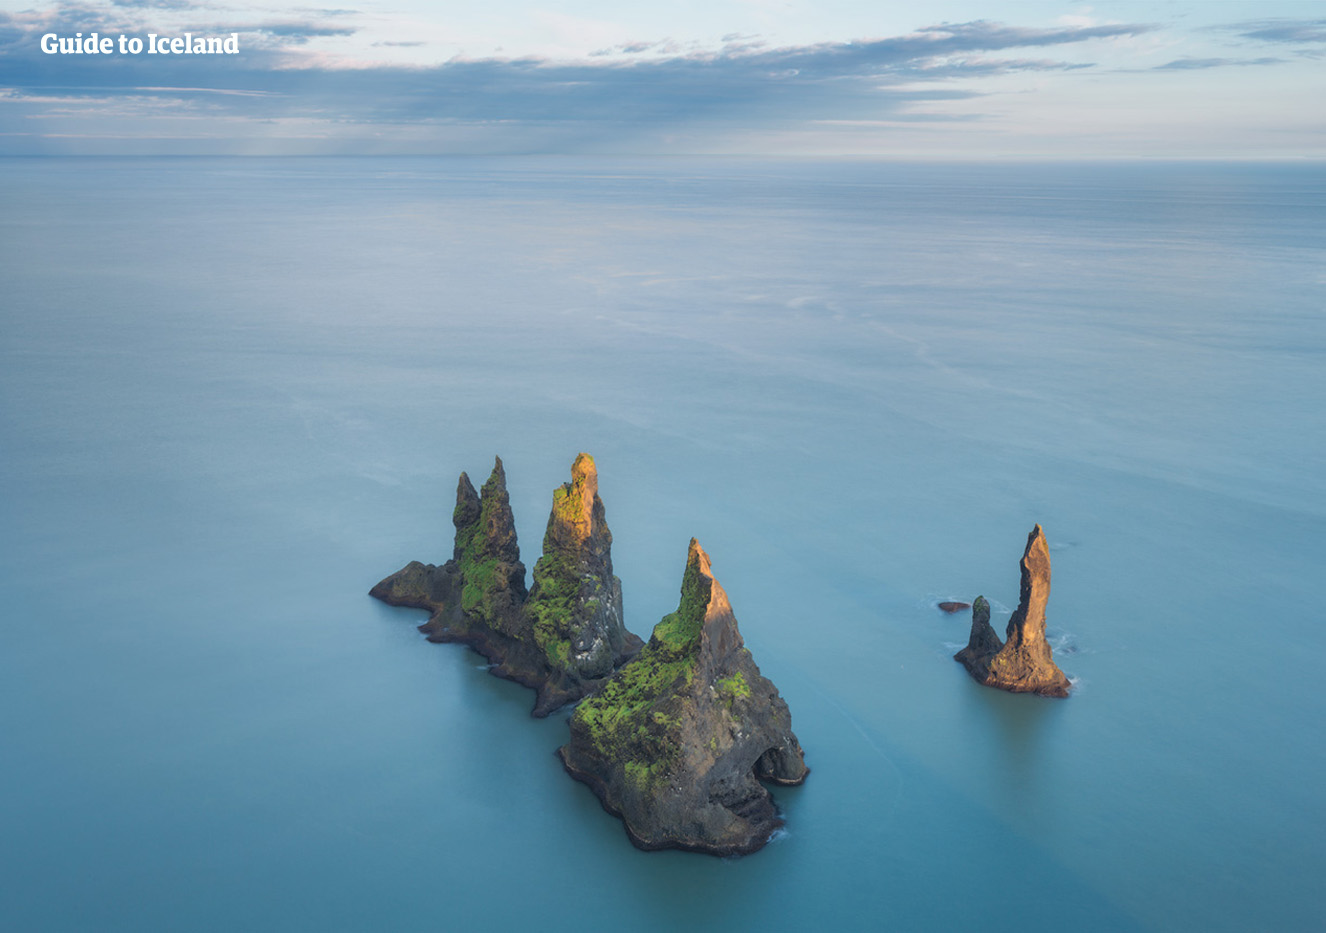 The large sea stacks Reynisdrangar on the South Coast were featured in scenes set in Eastwatch-by-the-Sea in the TV show Game of Thrones.